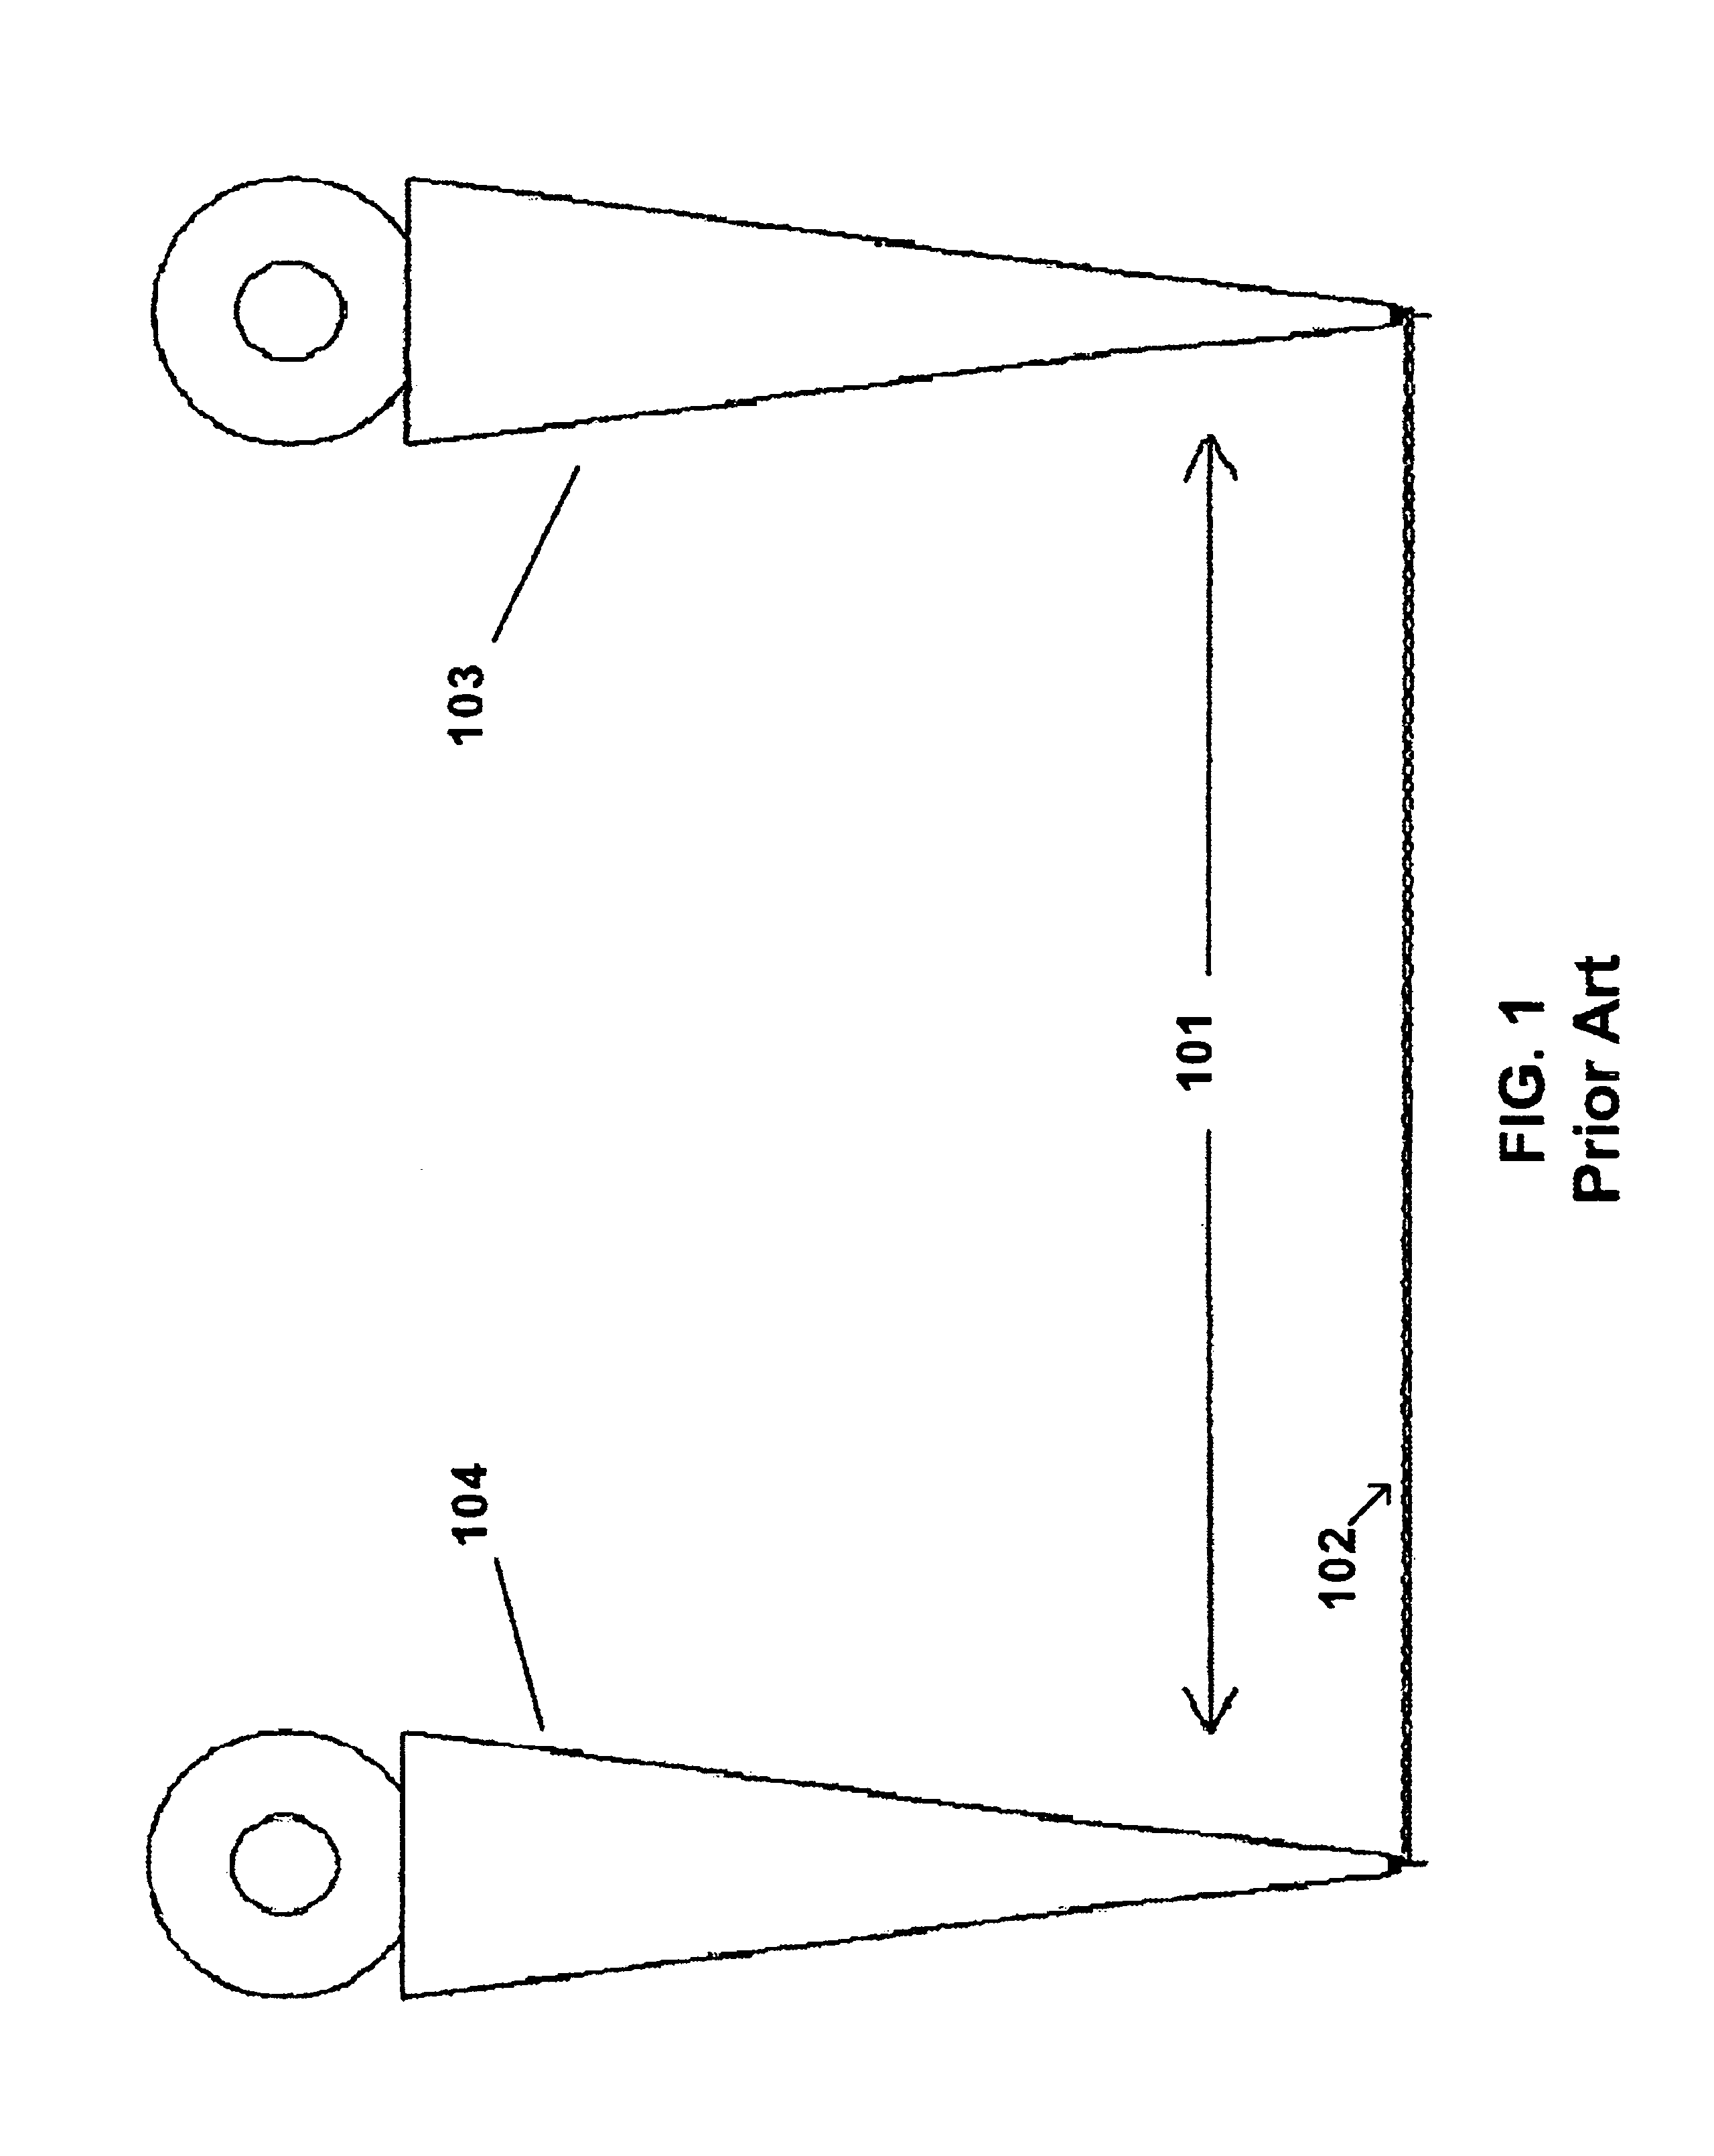 Superior system and method for determining the position of a first down of a football on a field during a game